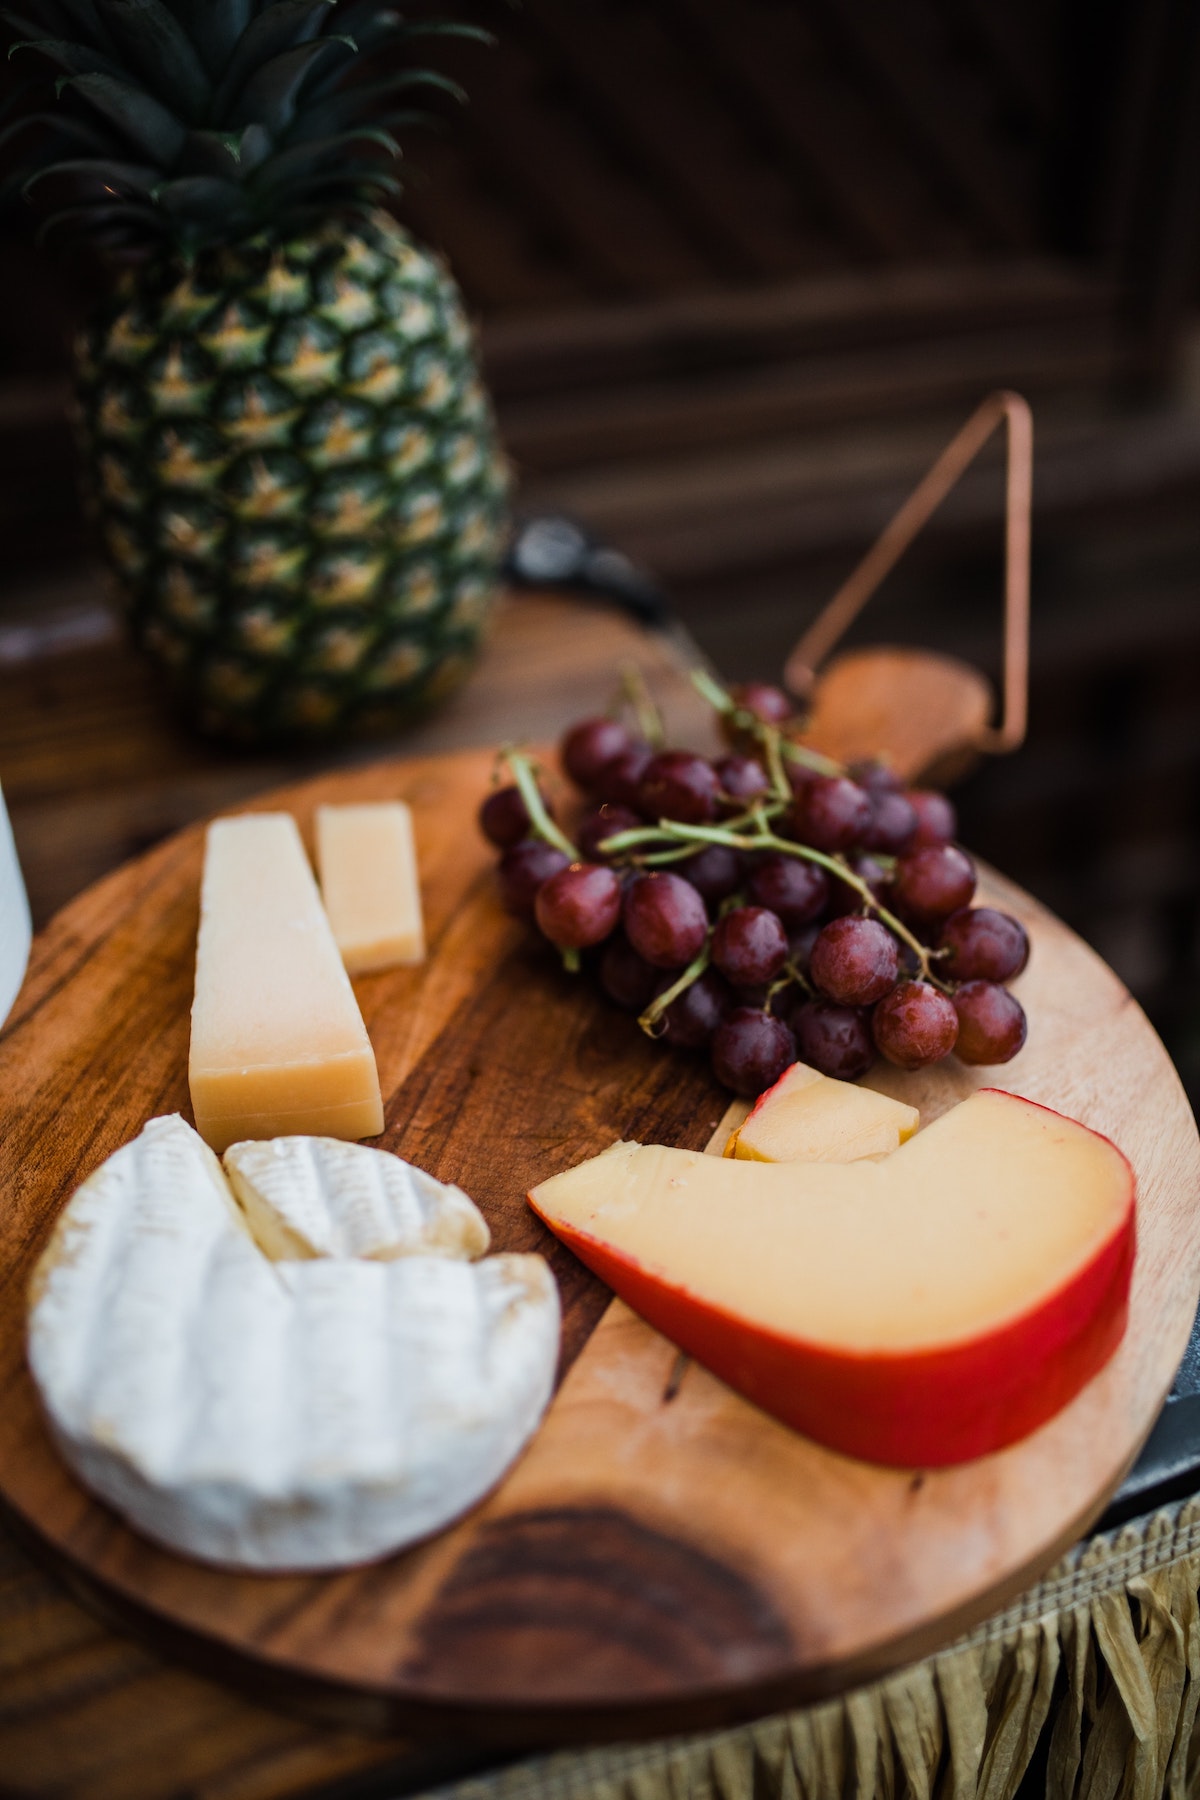 Three types of sliced cheese and a bunch of red grapes on a round wooden board with a pineapple visible in the background.